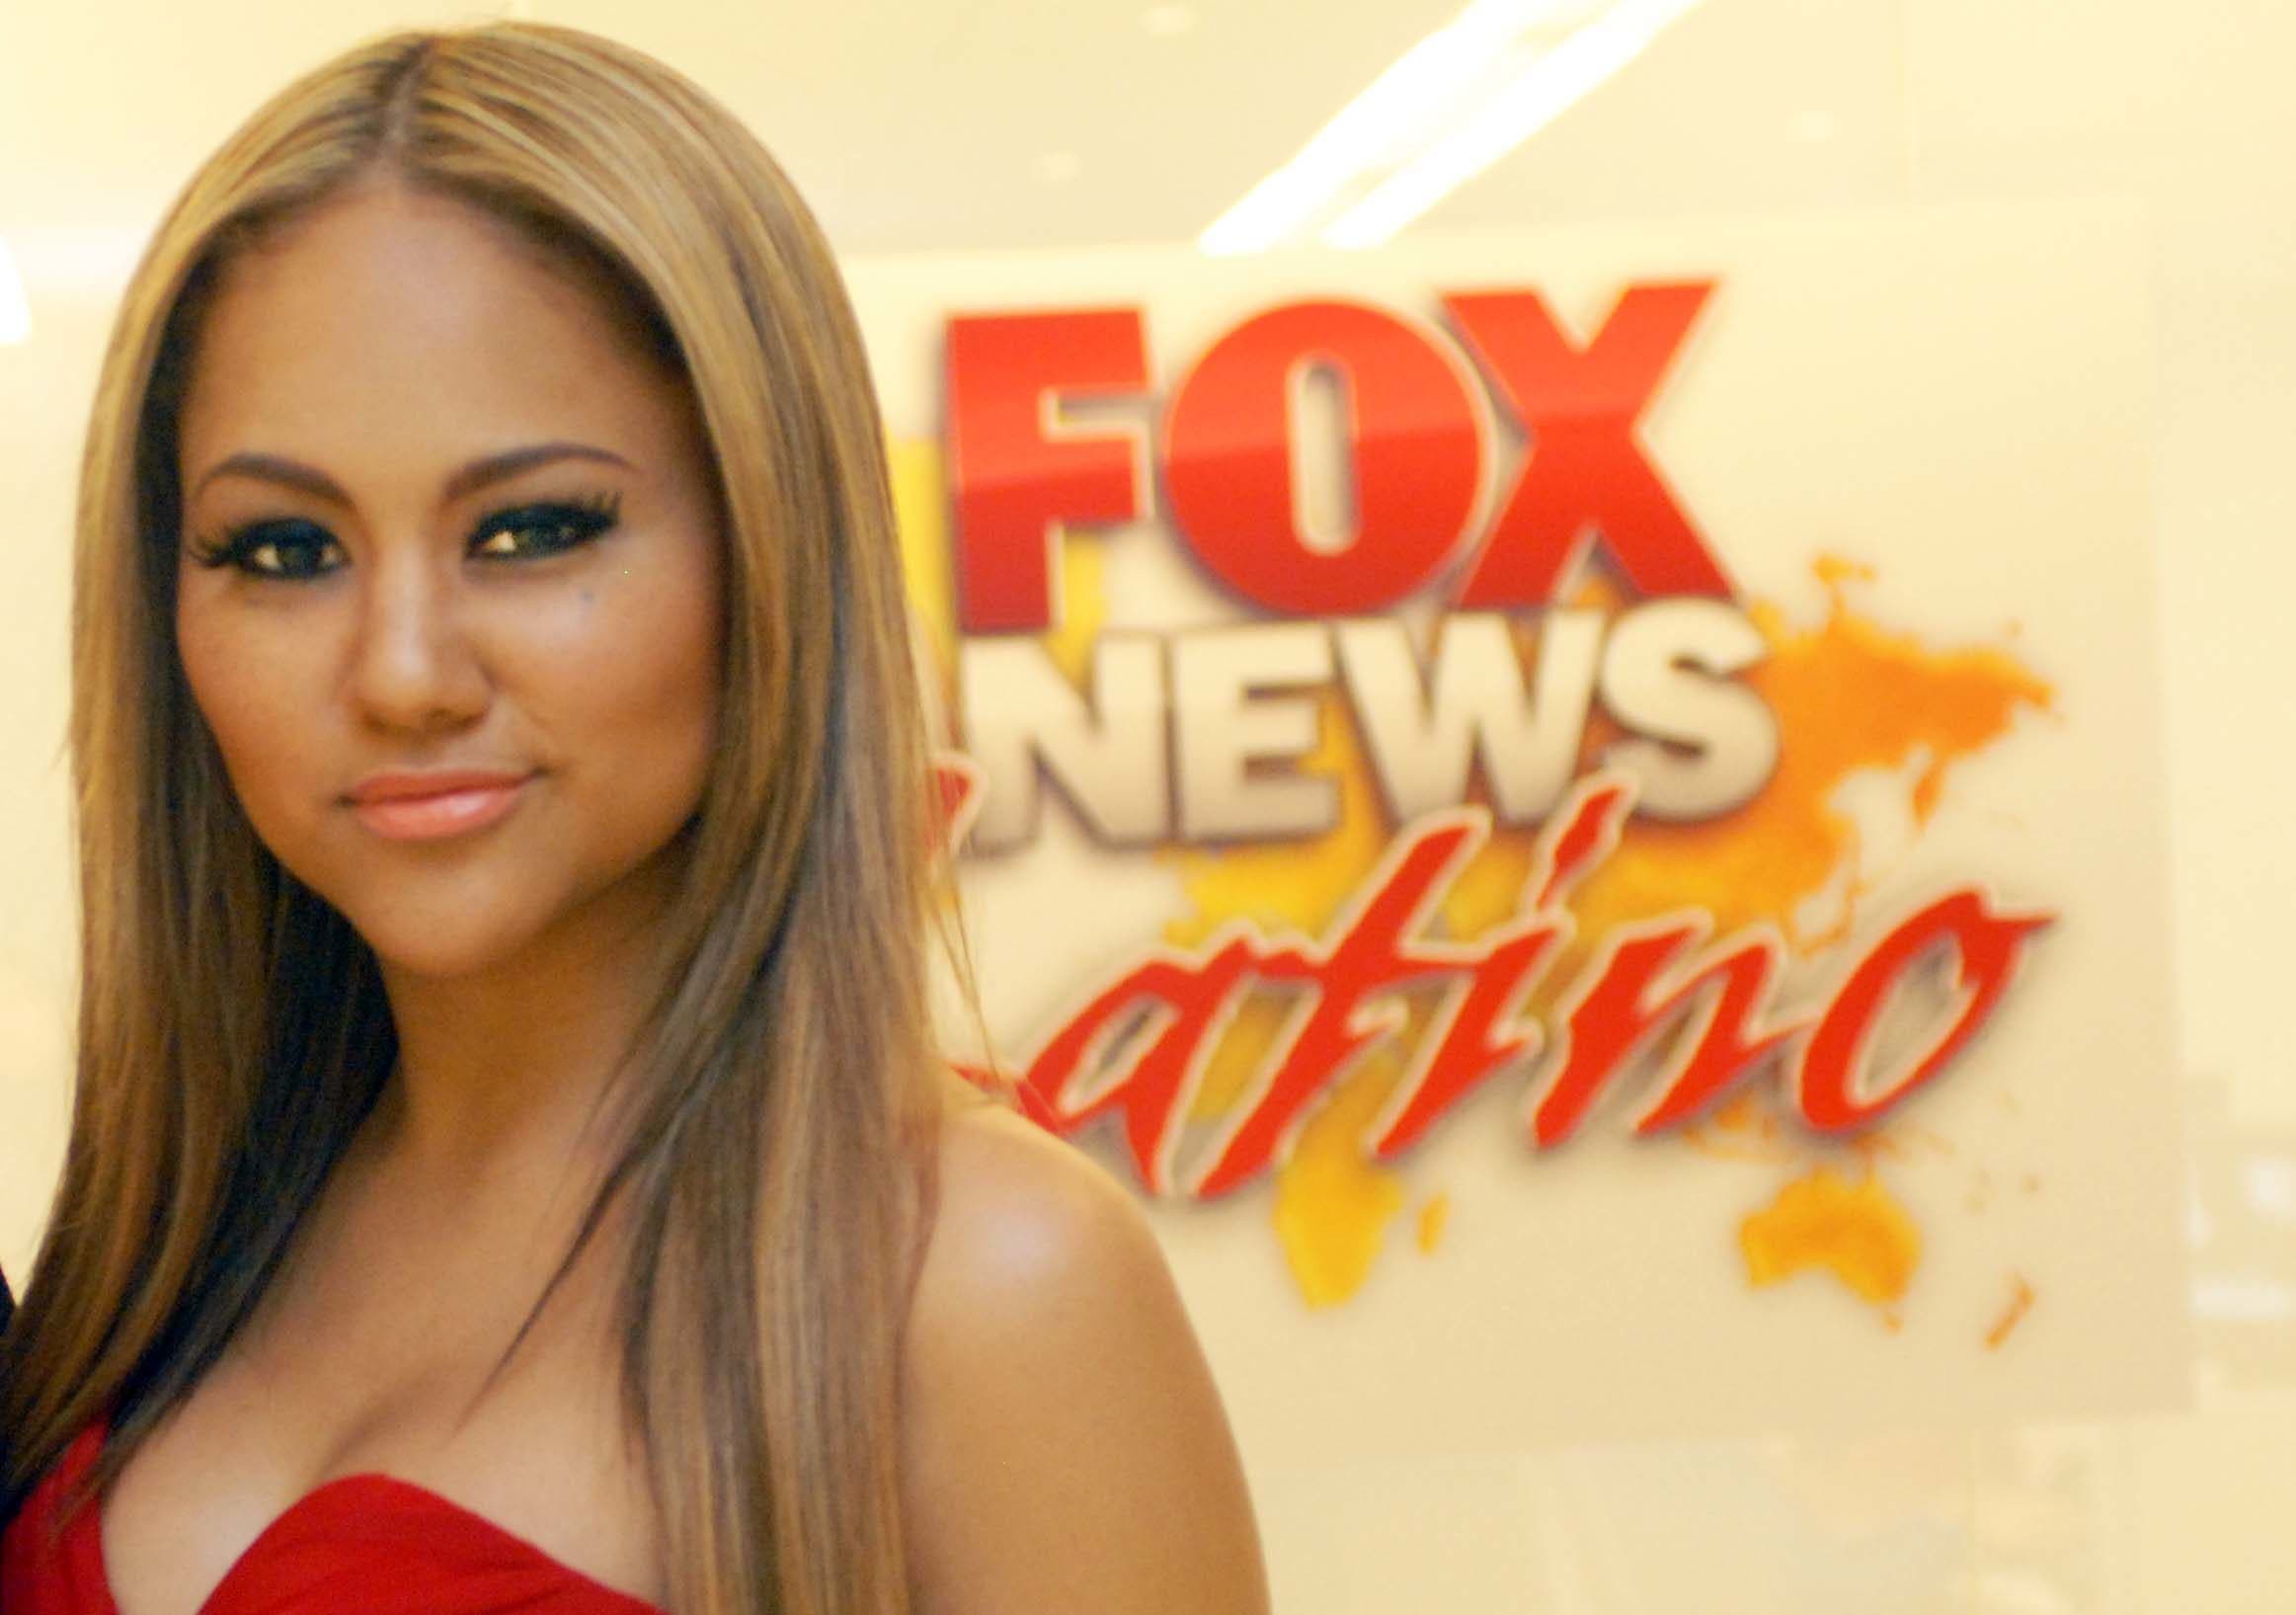 Behind the Scenes With Kat De Luna and Fox News Latino